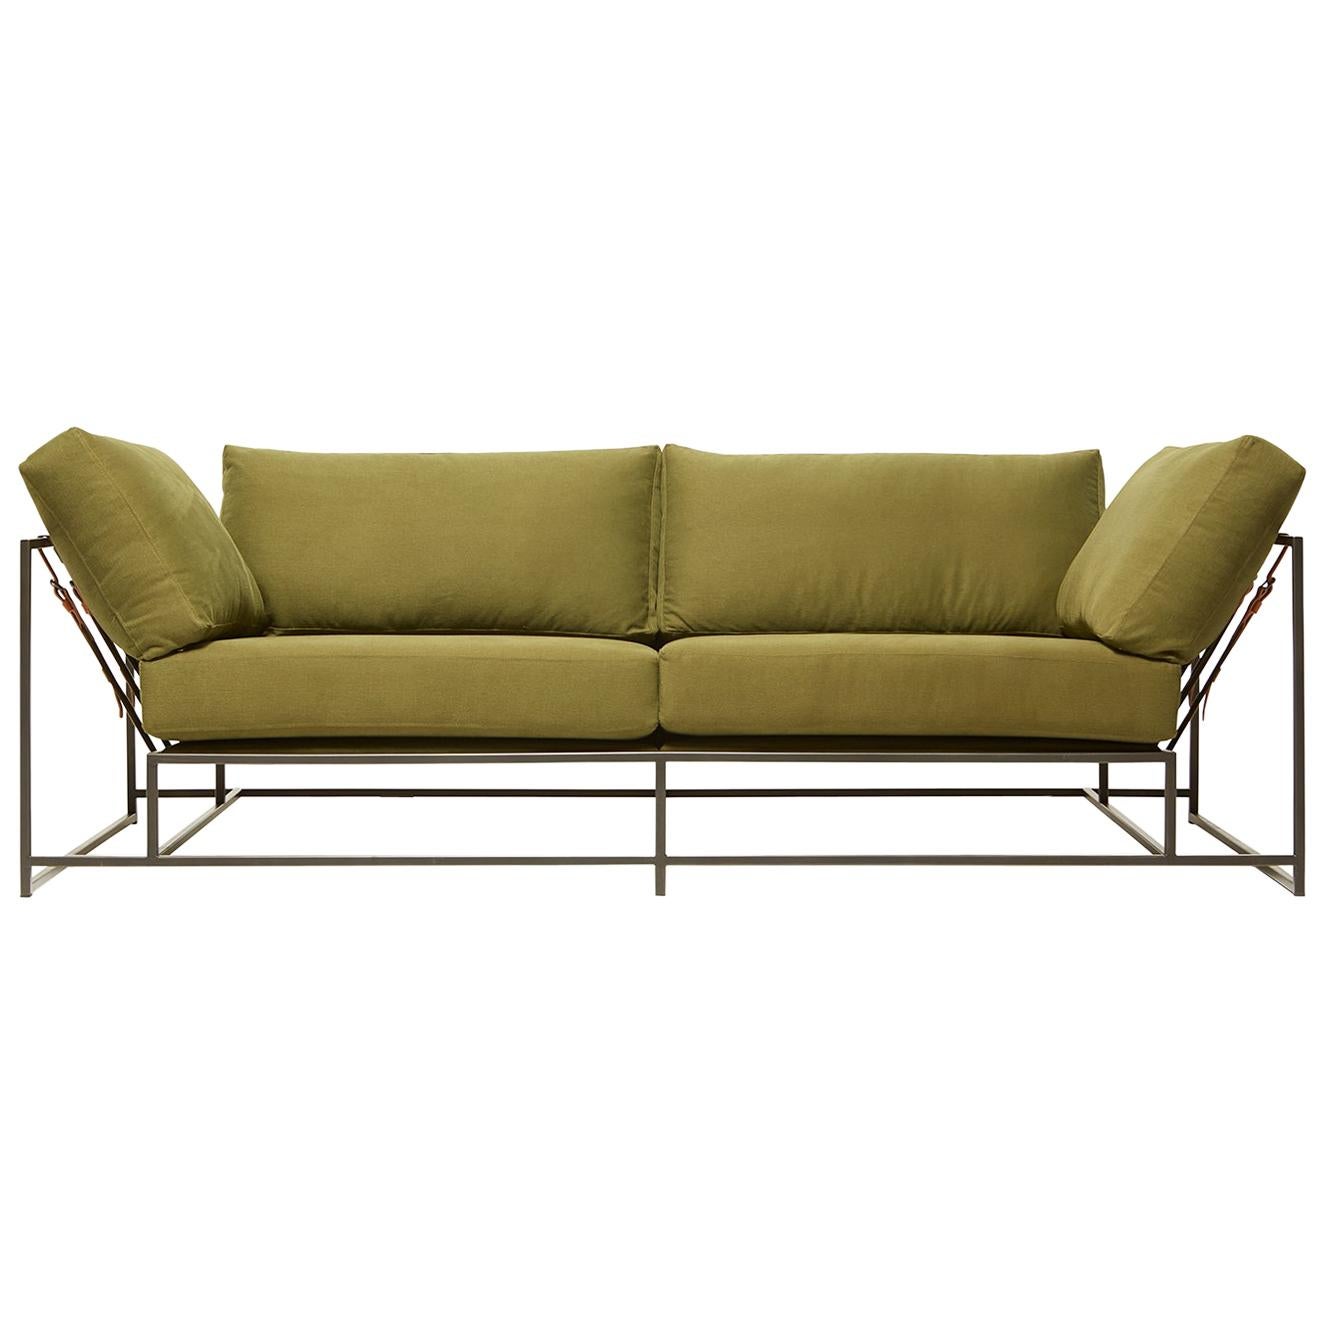 Olive Twill Canvas and Blackened Steel Two-Seat Sofa